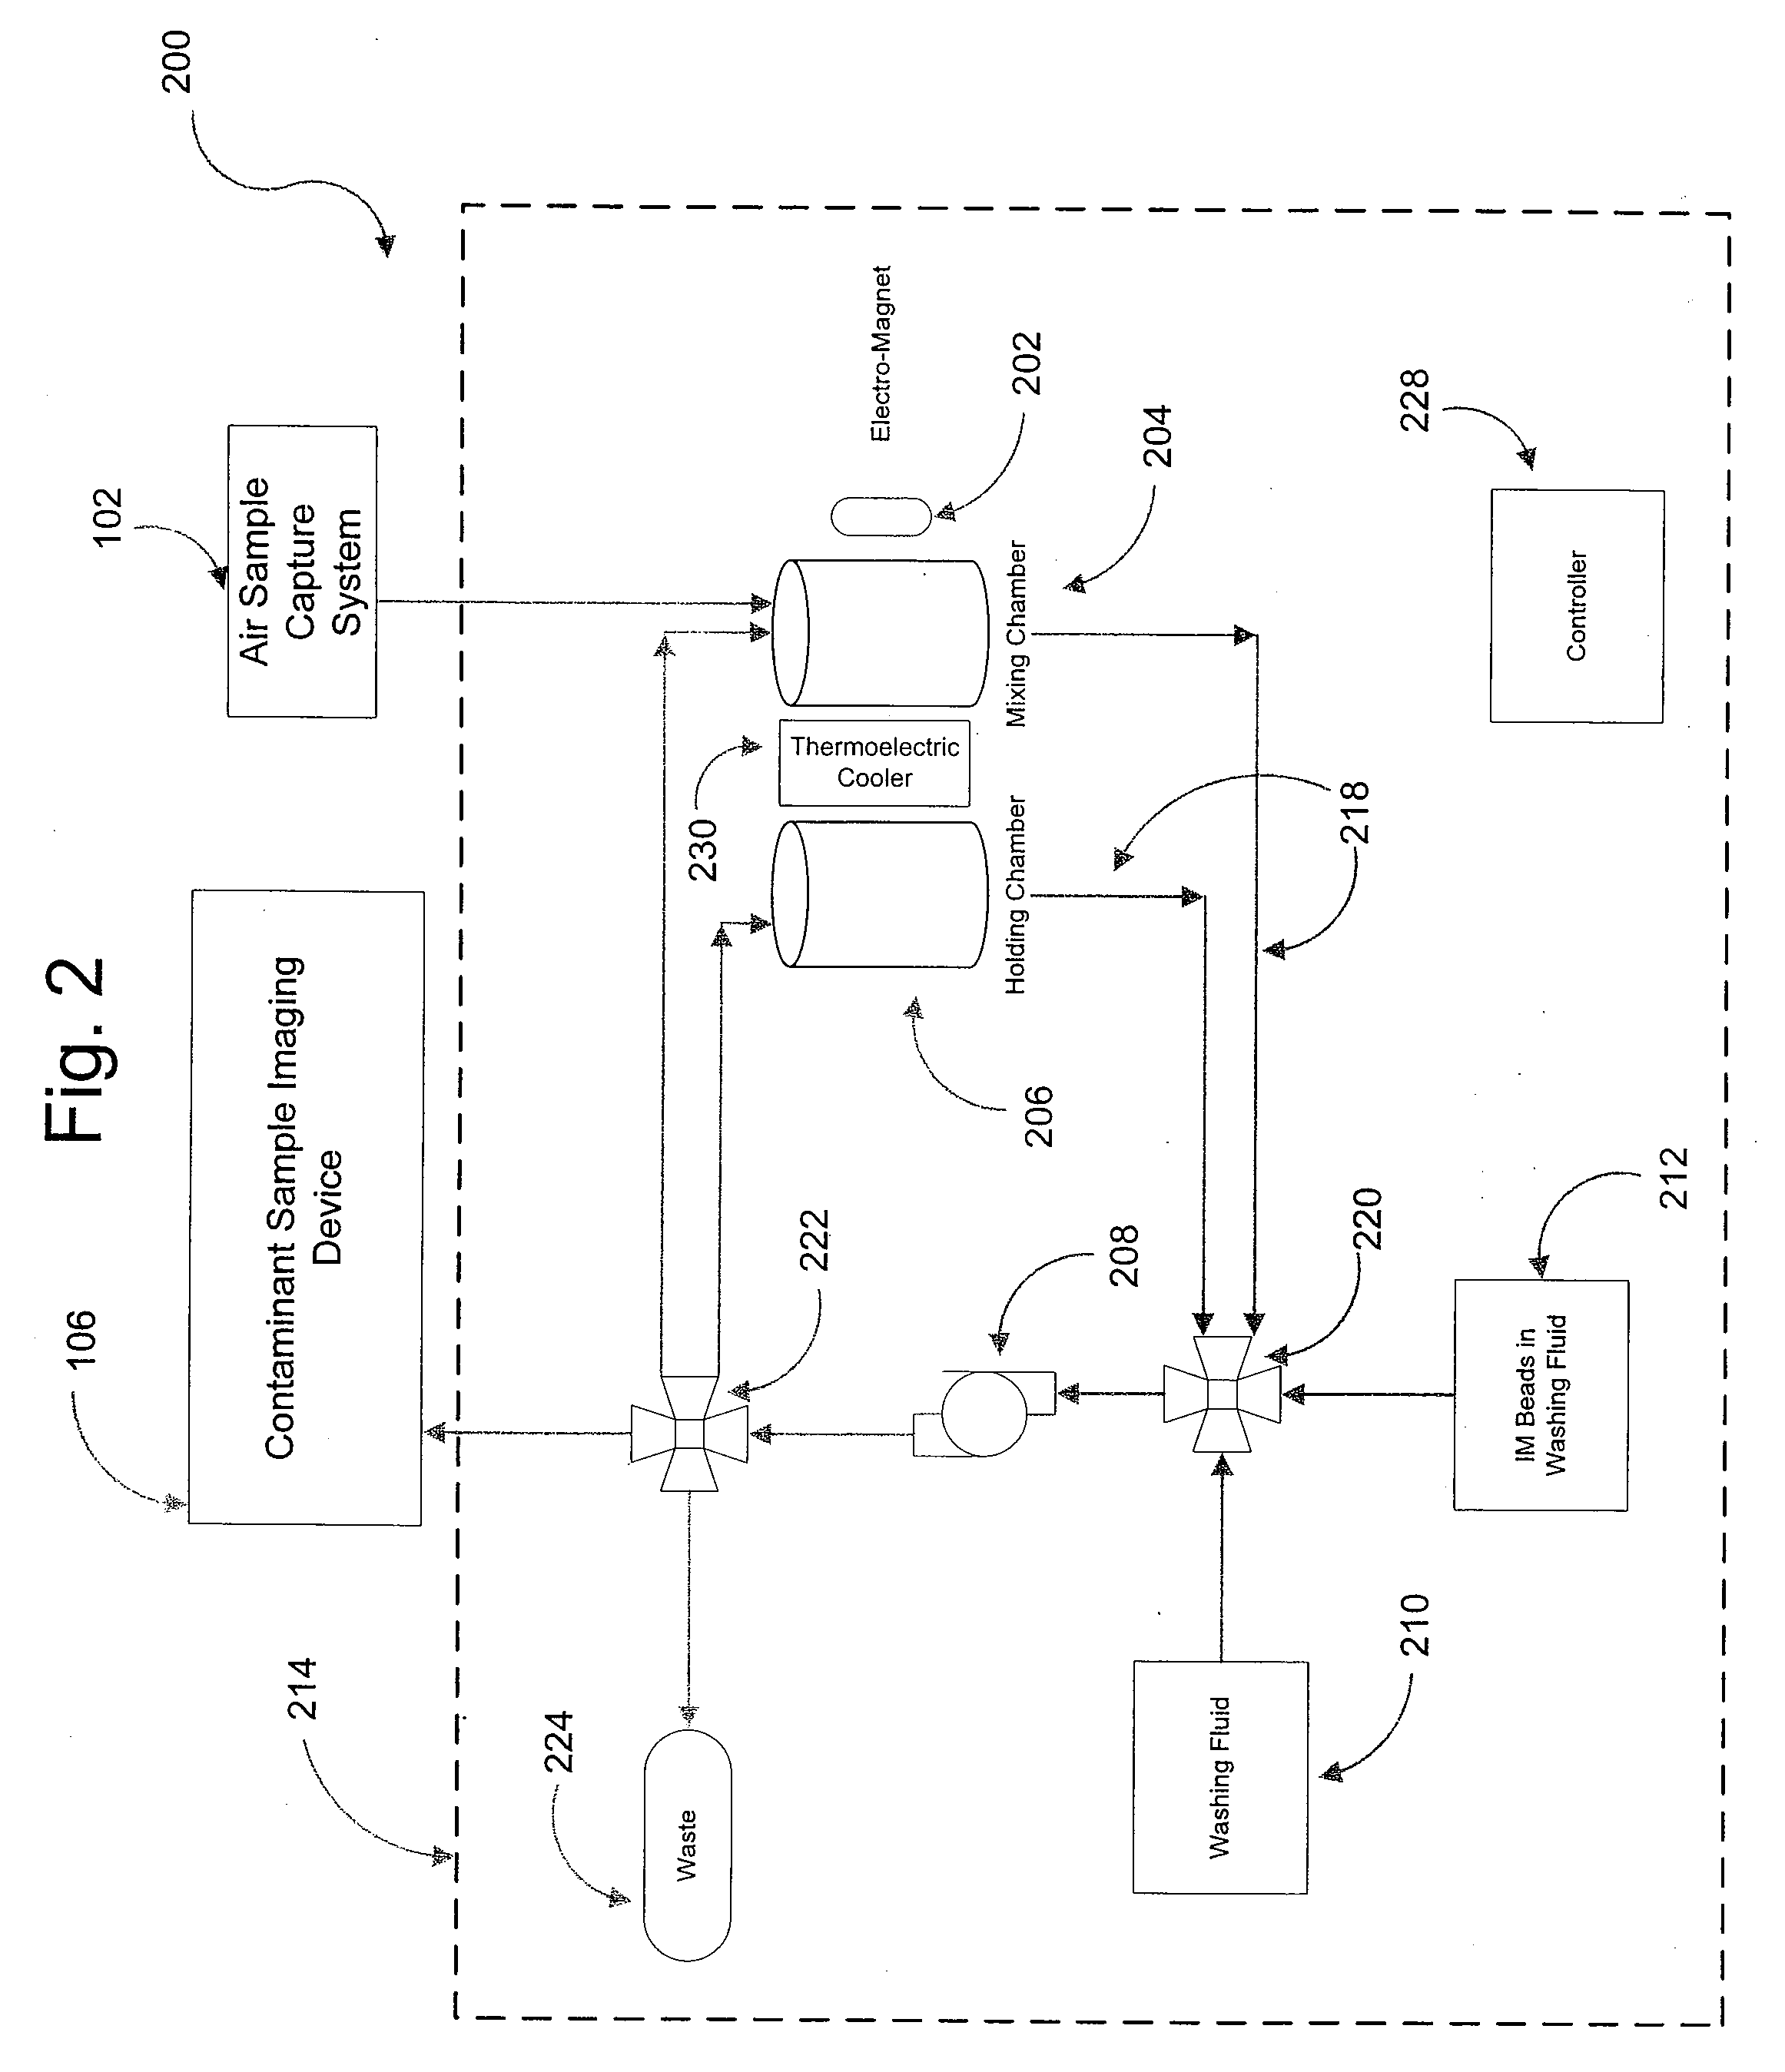 Systems and methods for detection of an airborne contaminant